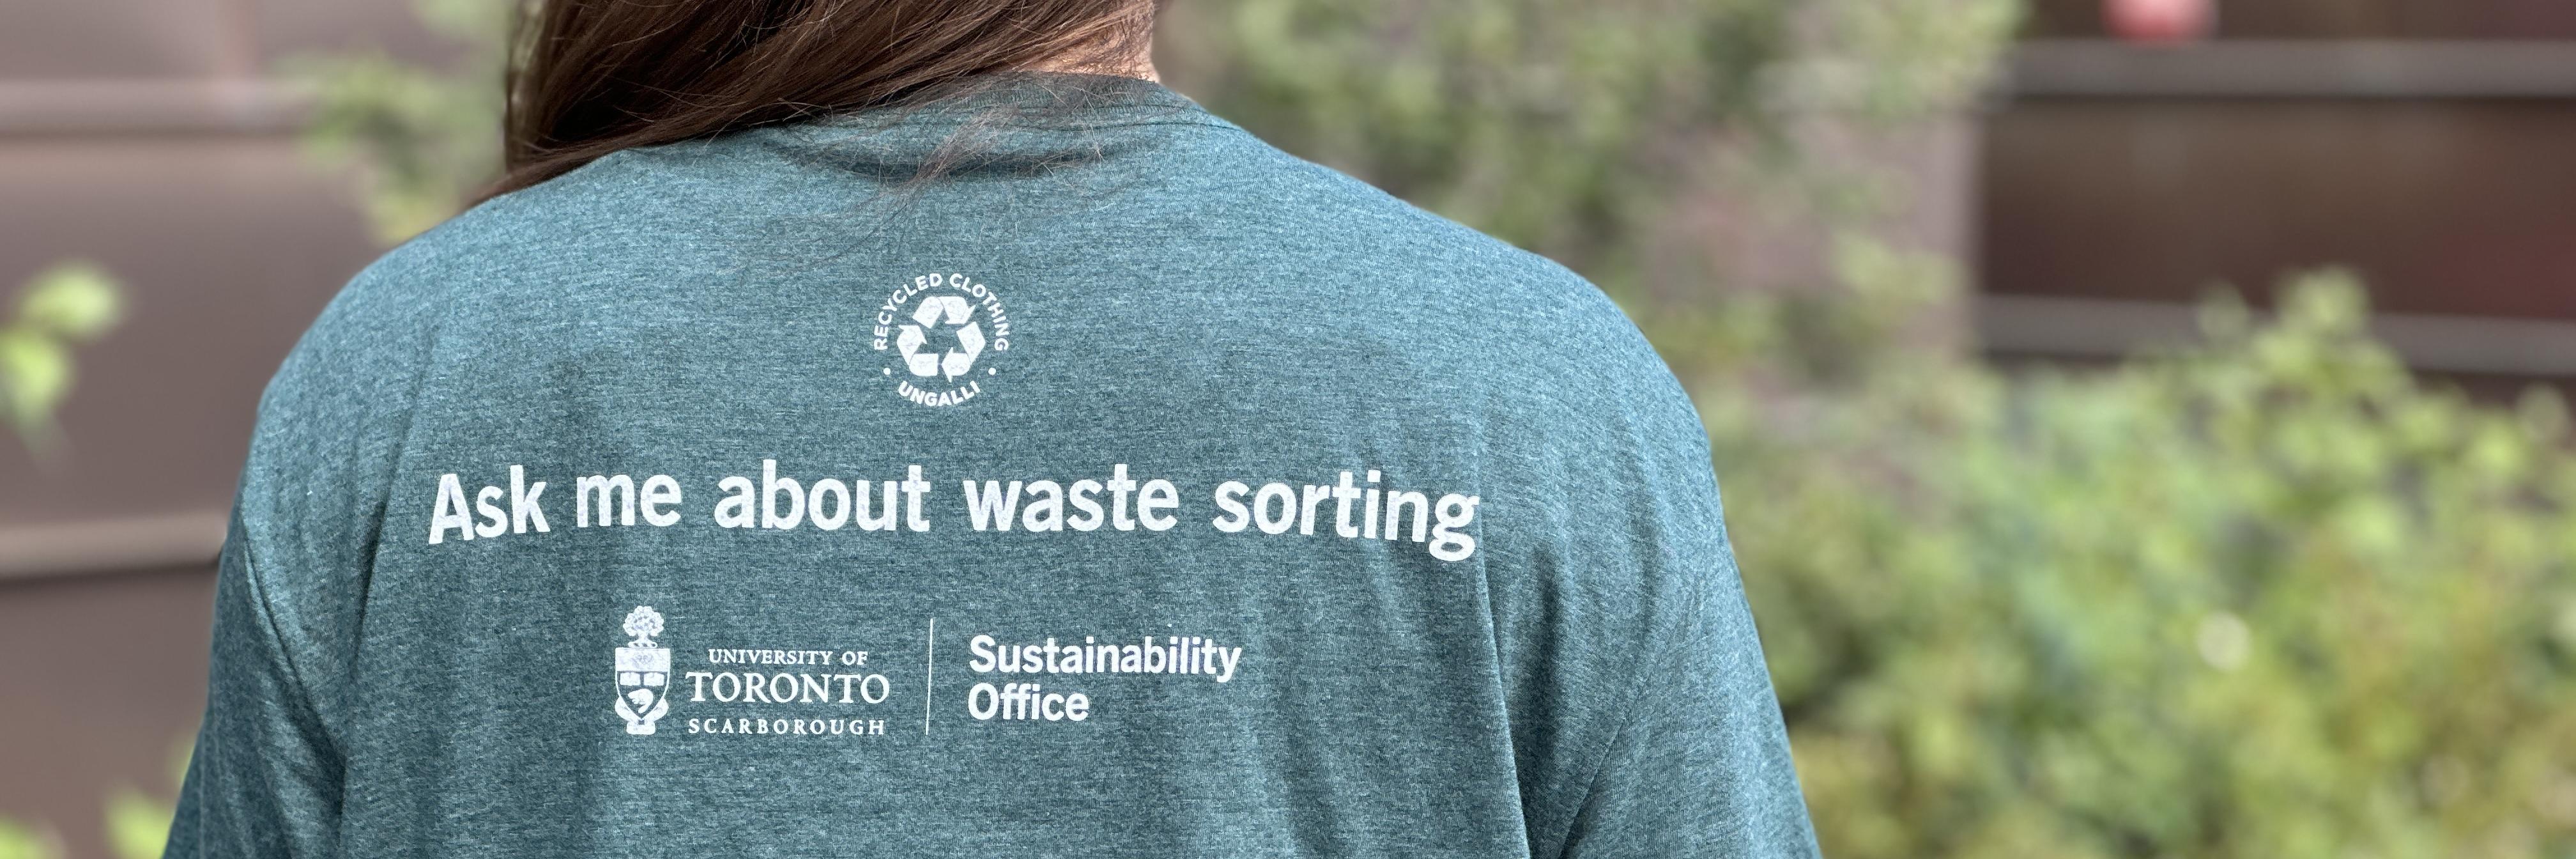 The back of the Waste Ambassador's T-Shirt reading "Ask me about waste sorting"